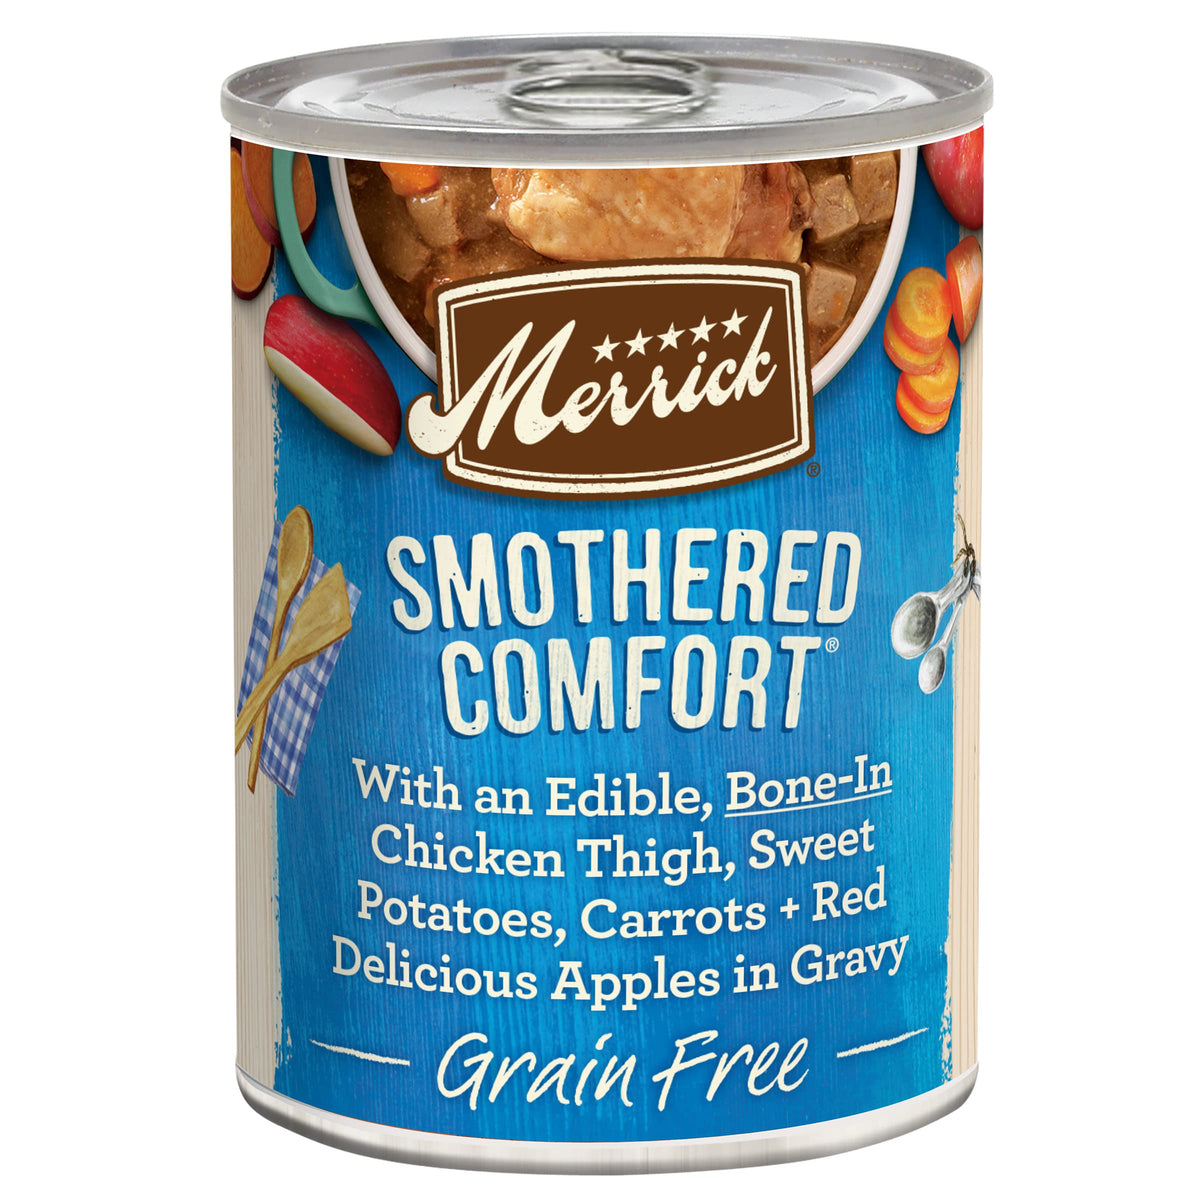 Merrick Grain Free Wet Dog Food, Smothered Comfort Canned Dog Food - 12.7 Ounce (Pack of 12)